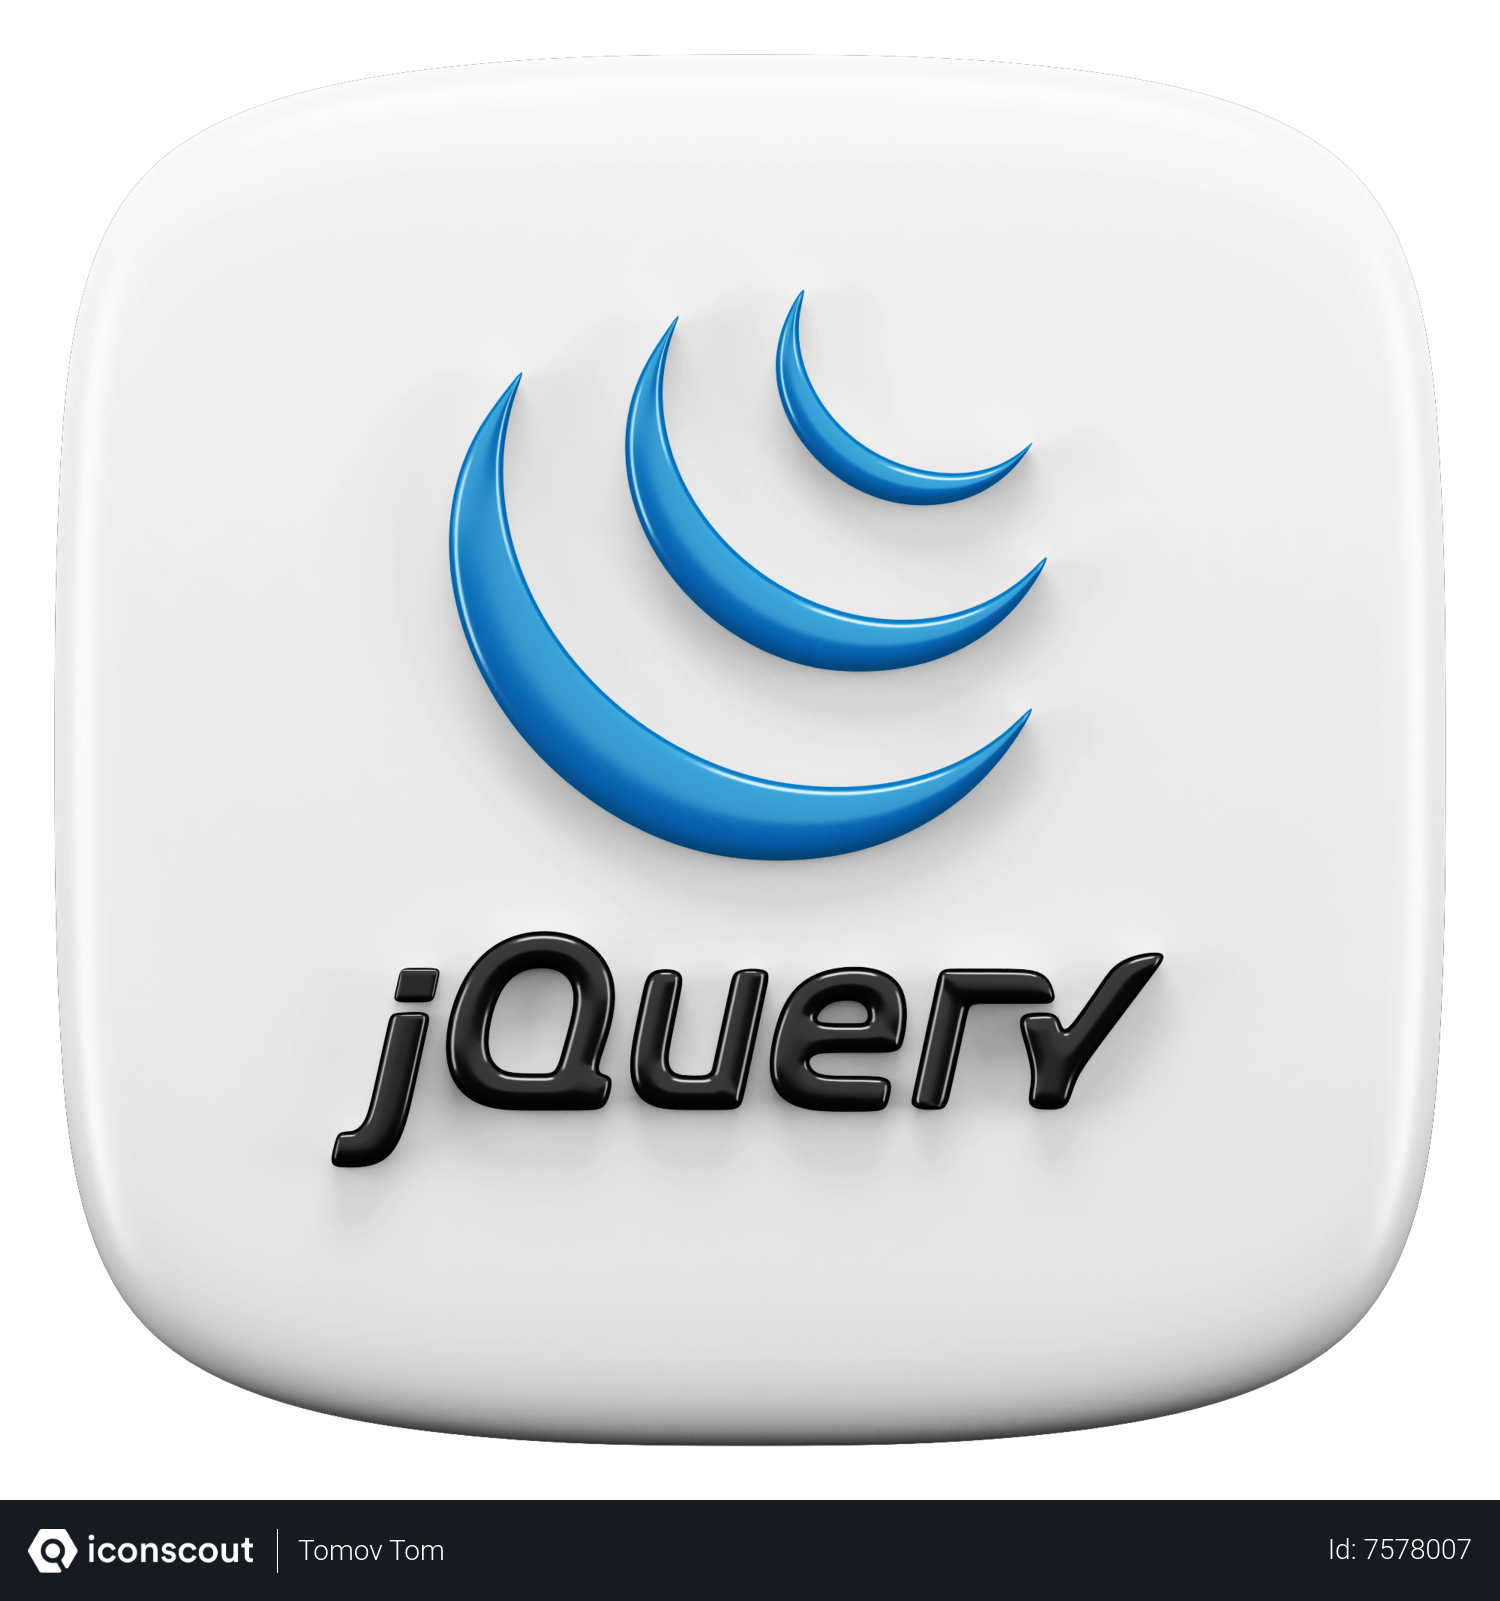 Moving away from jQuery to pure vanilla JavaScripts